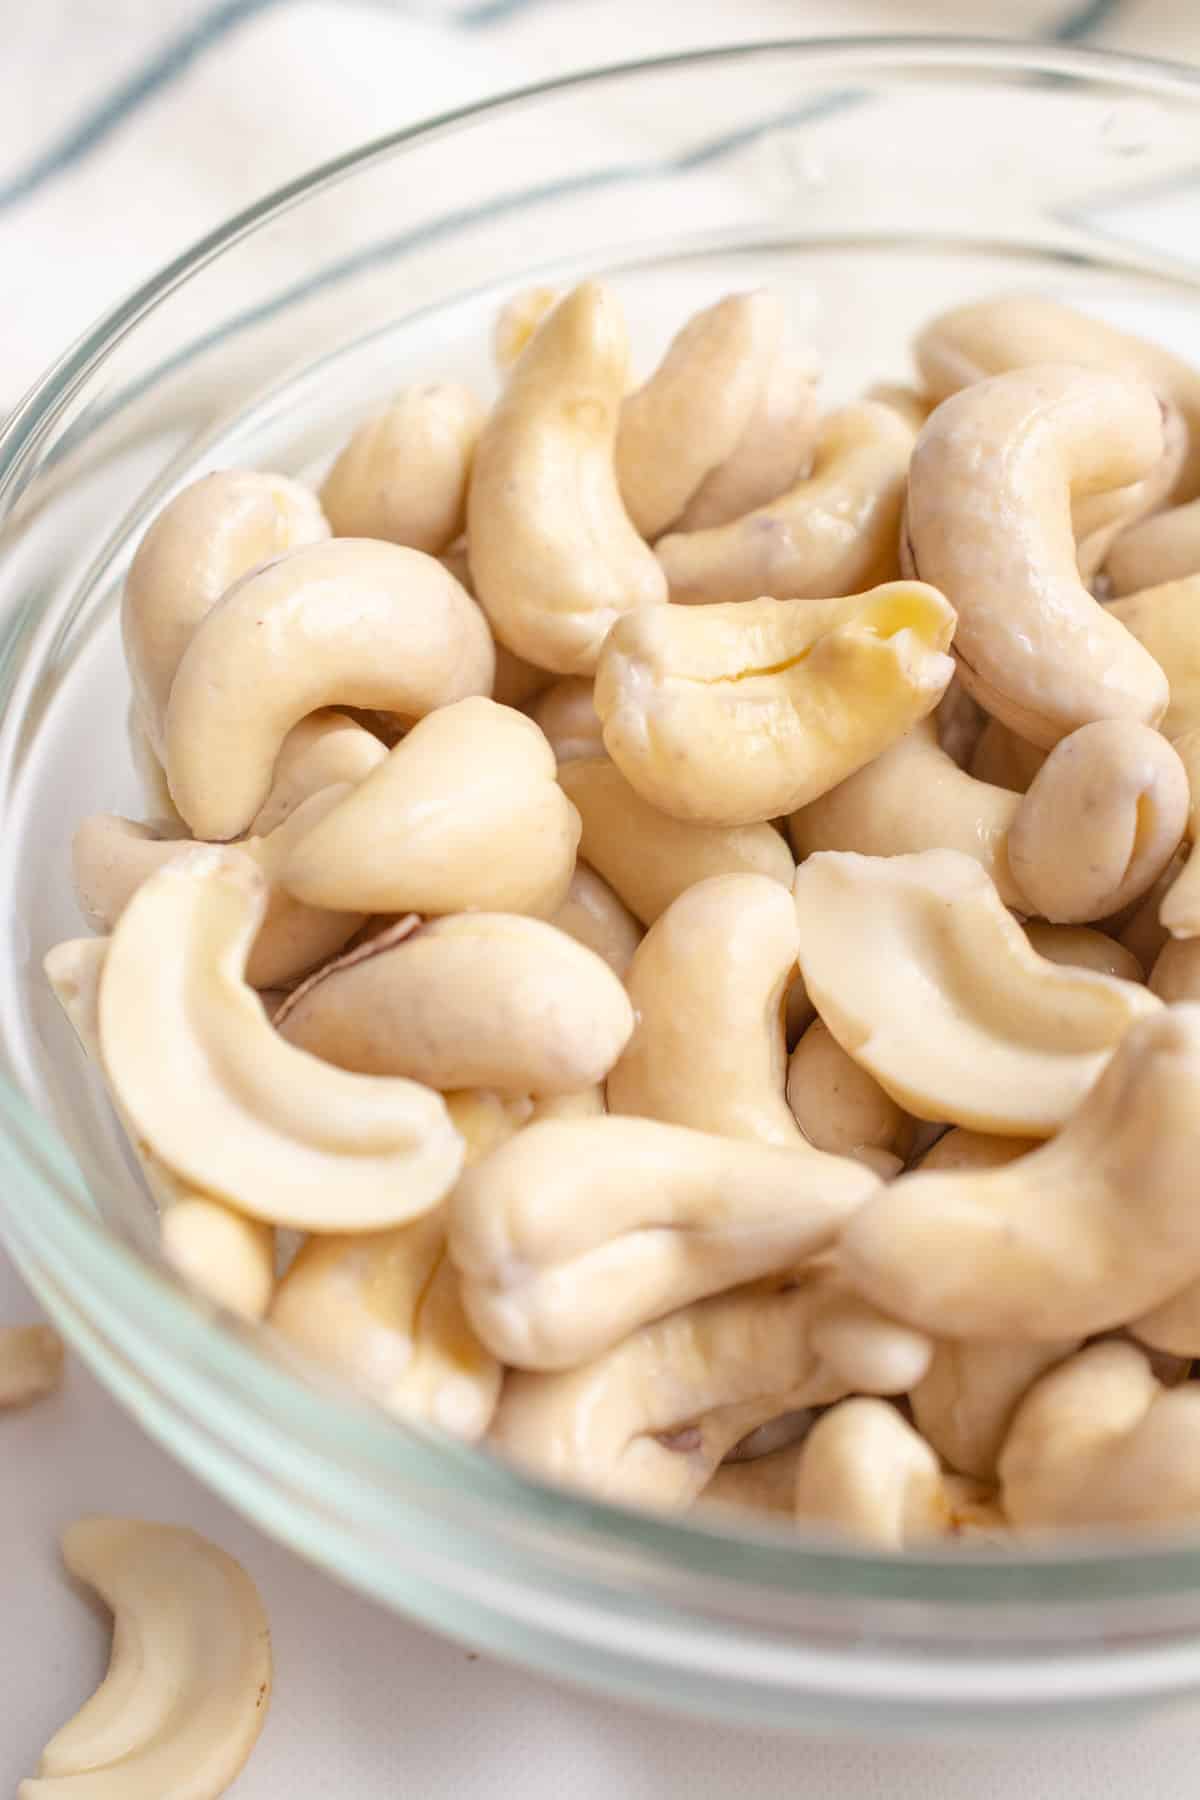 Softened cashews in a glass bowl after soaking.